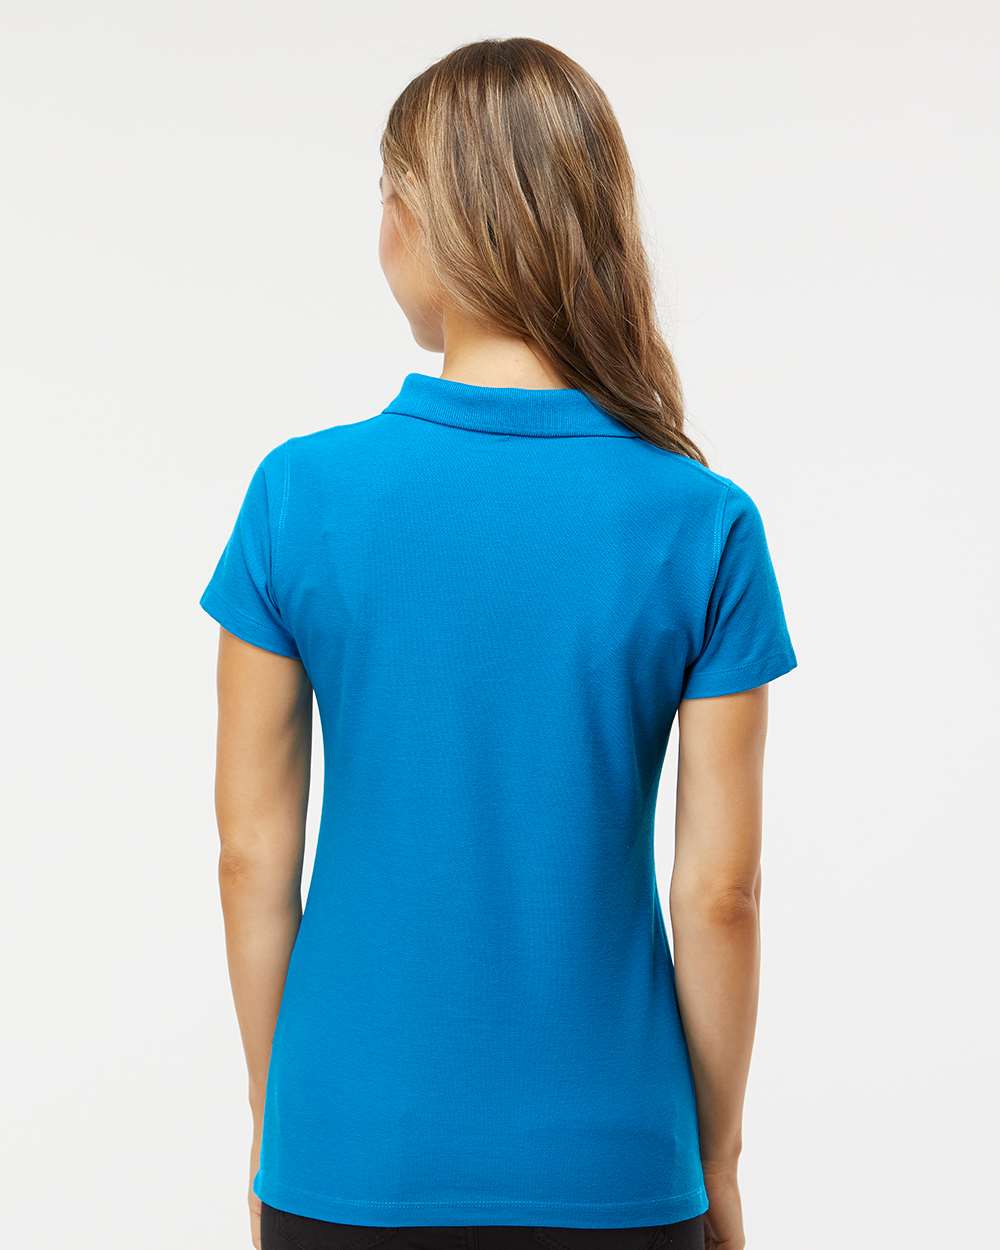 M&O Women’s Soft Touch Polo #7007 Turquoise Back